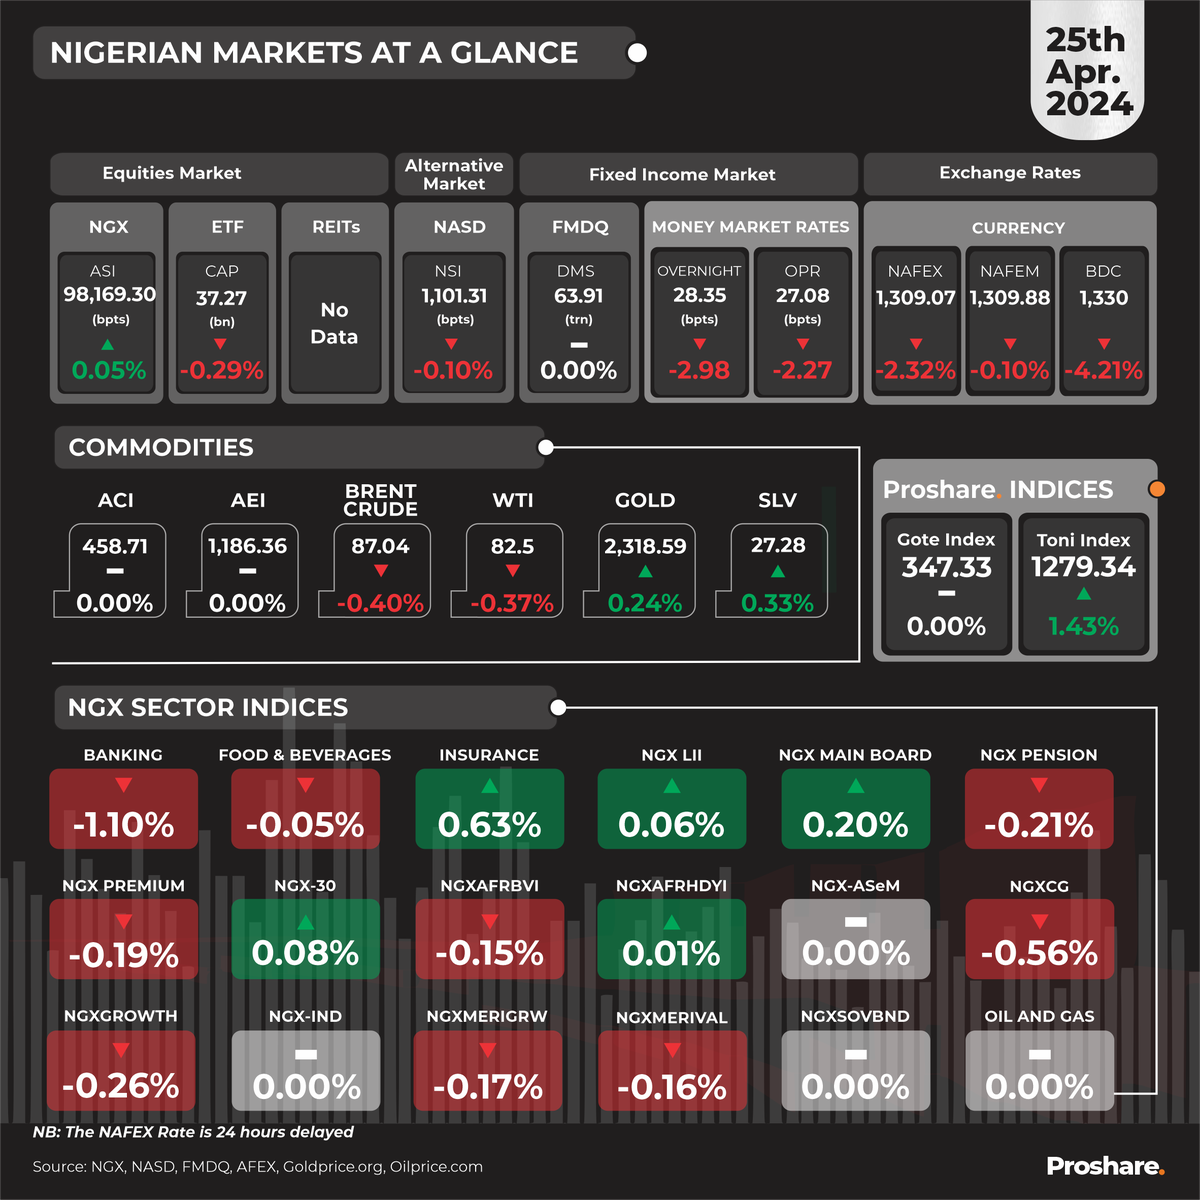 The Nigerian Markets at a Glance 25th April 2024  

Visit proshare.co/articles/list?… for more market information.

#AskProshare
#marketupdates